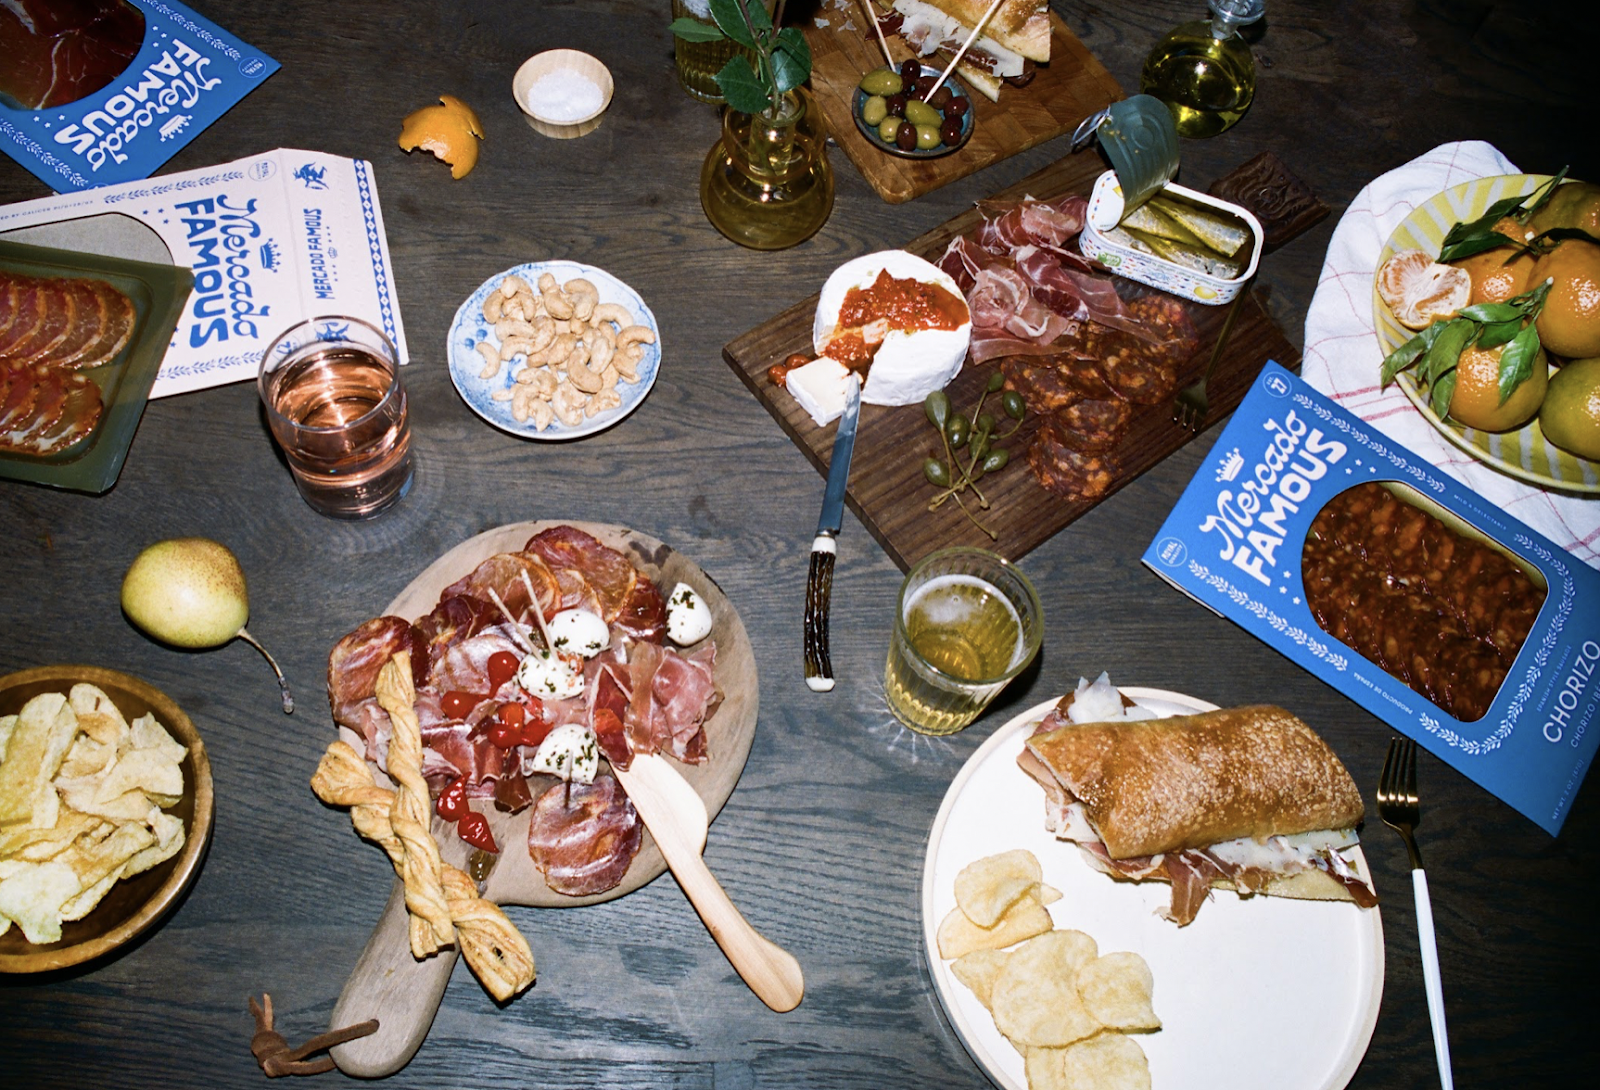 Overhead view of a table spread with various snacks, charcuterie, and two boxes of advertised products